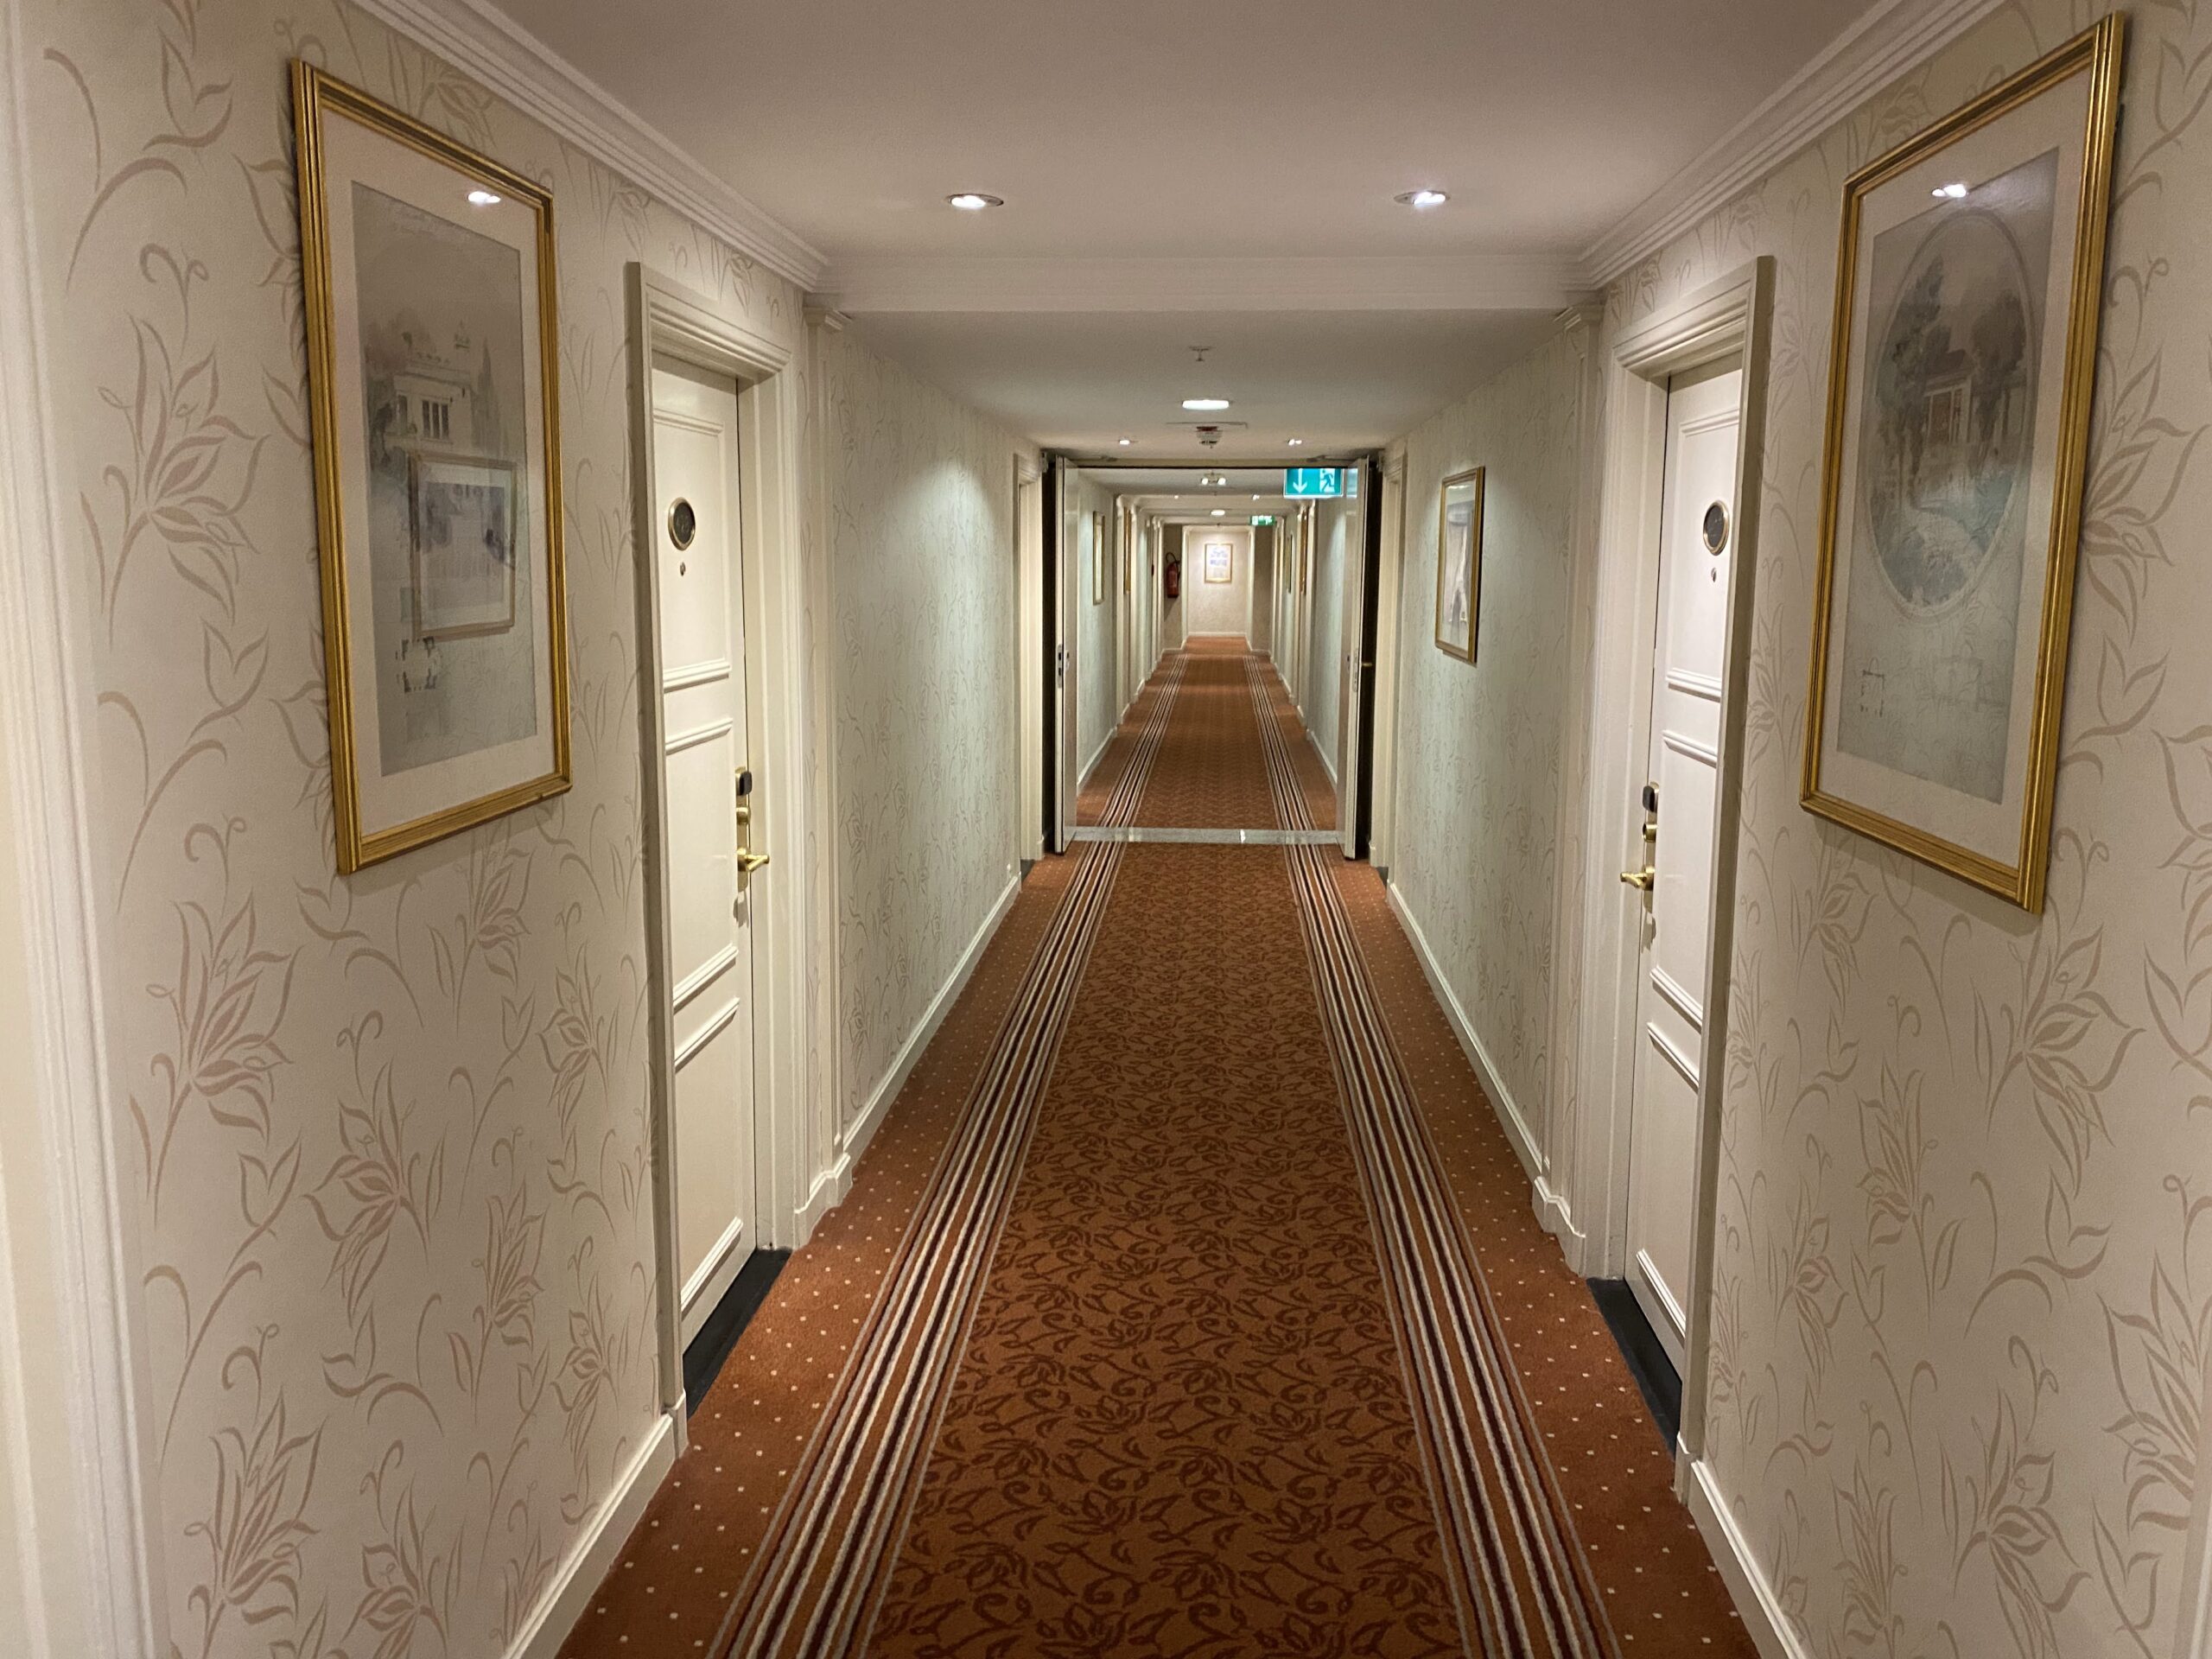 a long hallway with a carpeted floor and doors